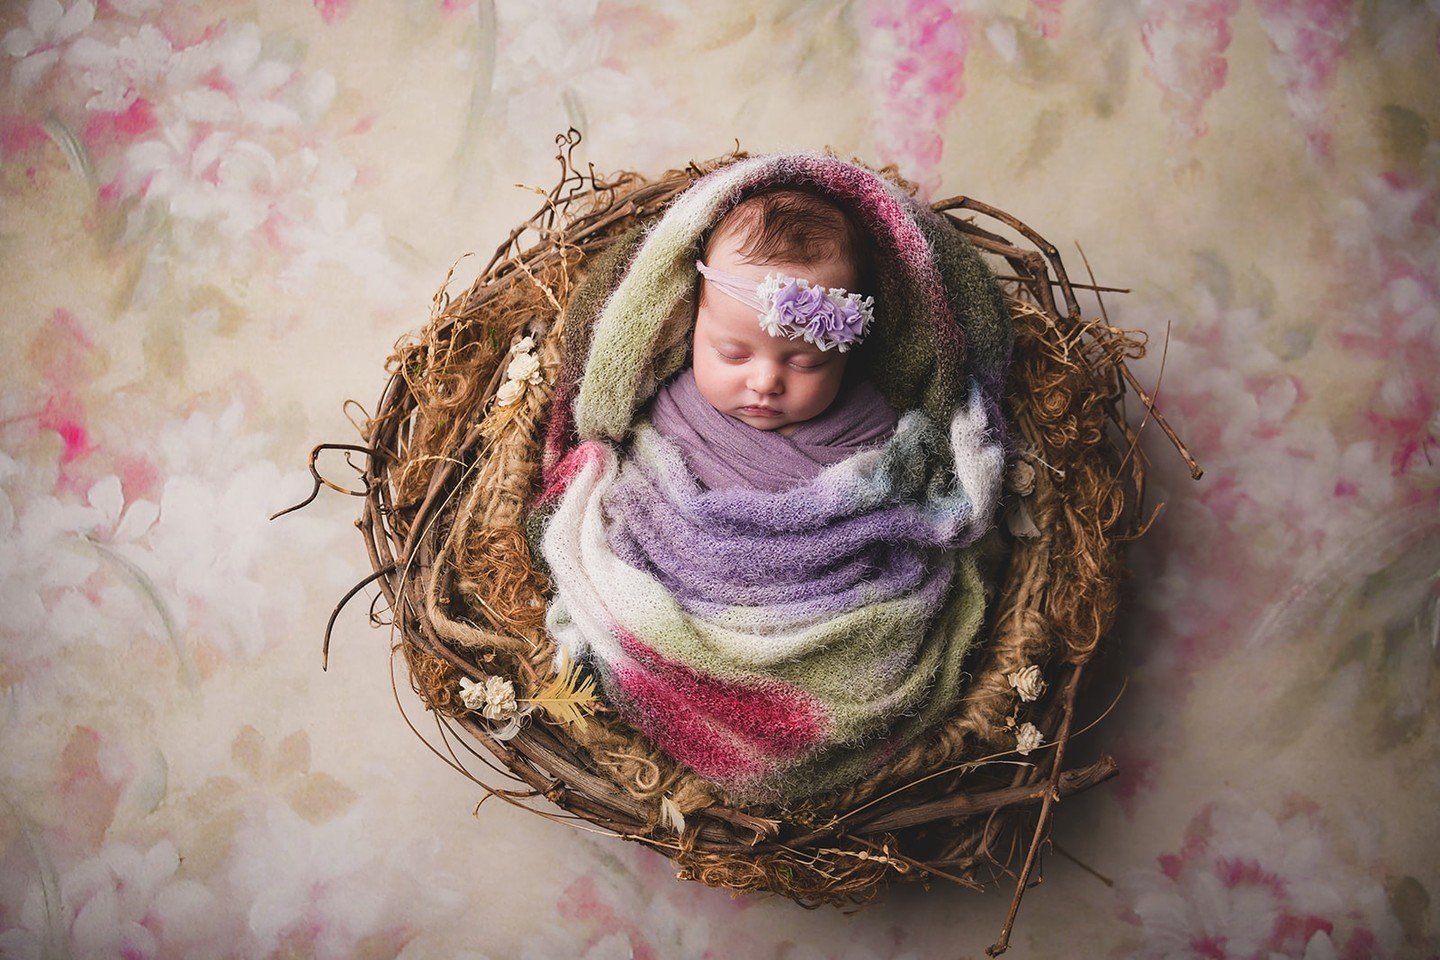 Happy Monday, friends! You know the drill, it's #MomJokeMonday
What color do kittens love the most? 
Purrrple.
😹 
Speaking of purple... How precious is Baby Violet?! Absolutely love how this newborn shoot turned out!